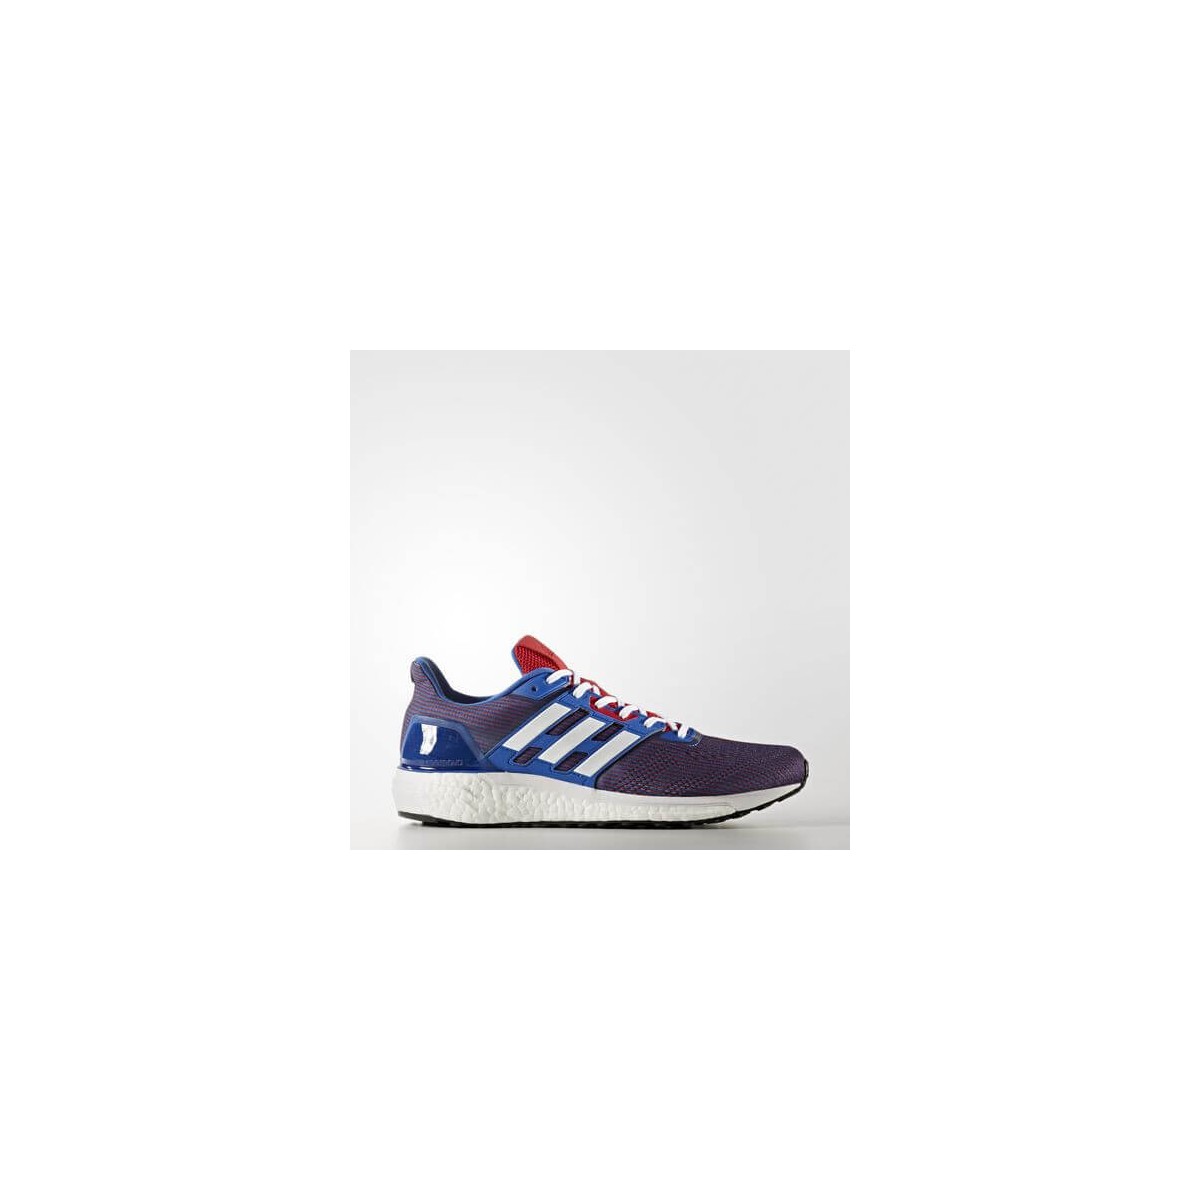 Running shoes Adidas Supernova and red Man AW17